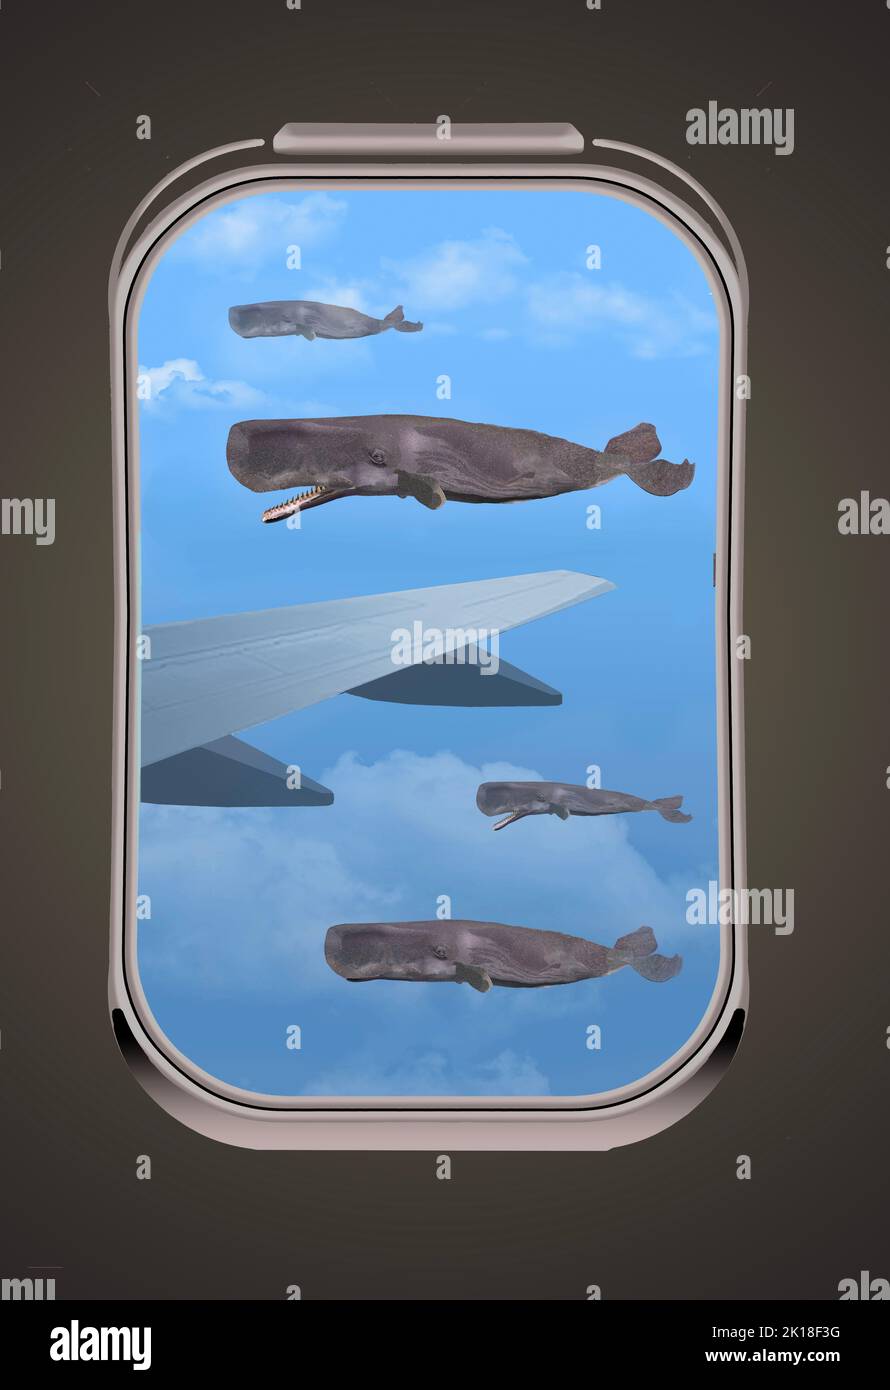 Sperm whales fly and are seen outside an airliner window near the airplane wing in a 3-d fantasy illustration. Stock Photo